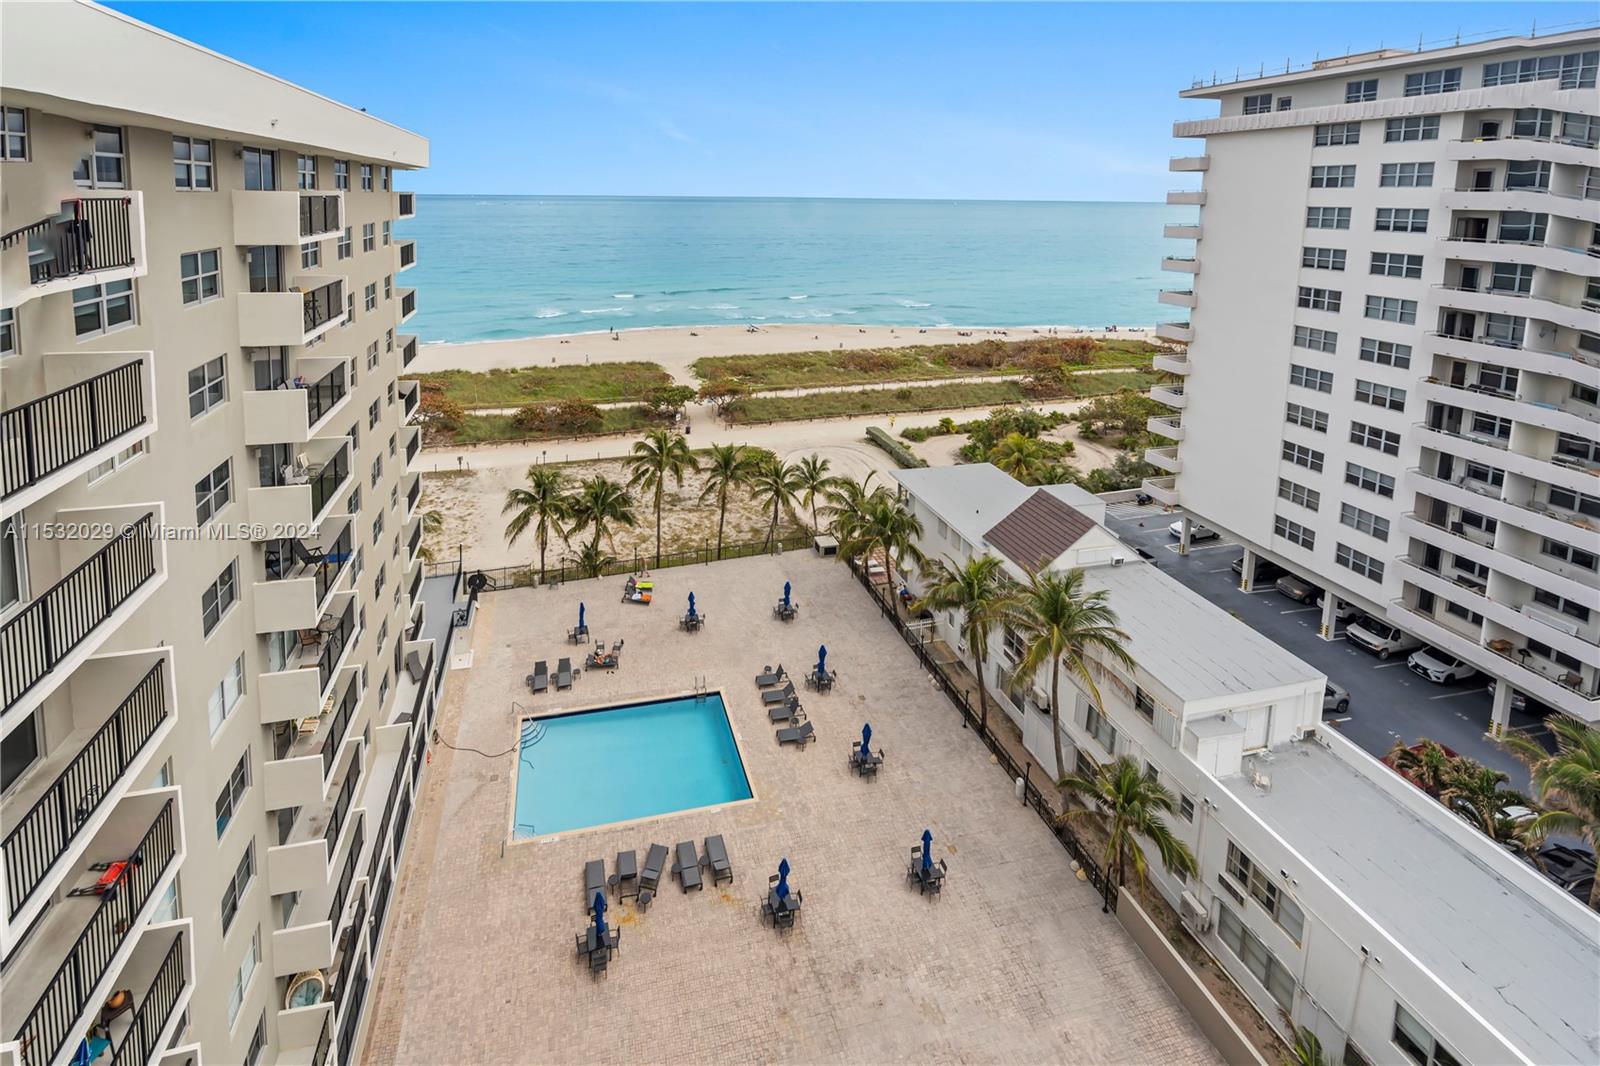 9273 Collins Ave Unit 1111, Surfside, Florida, 33154, United States, 1 Bedroom Bedrooms, ,2 BathroomsBathrooms,Residential,For Sale,9273 Collins Ave Unit 1111,1473701